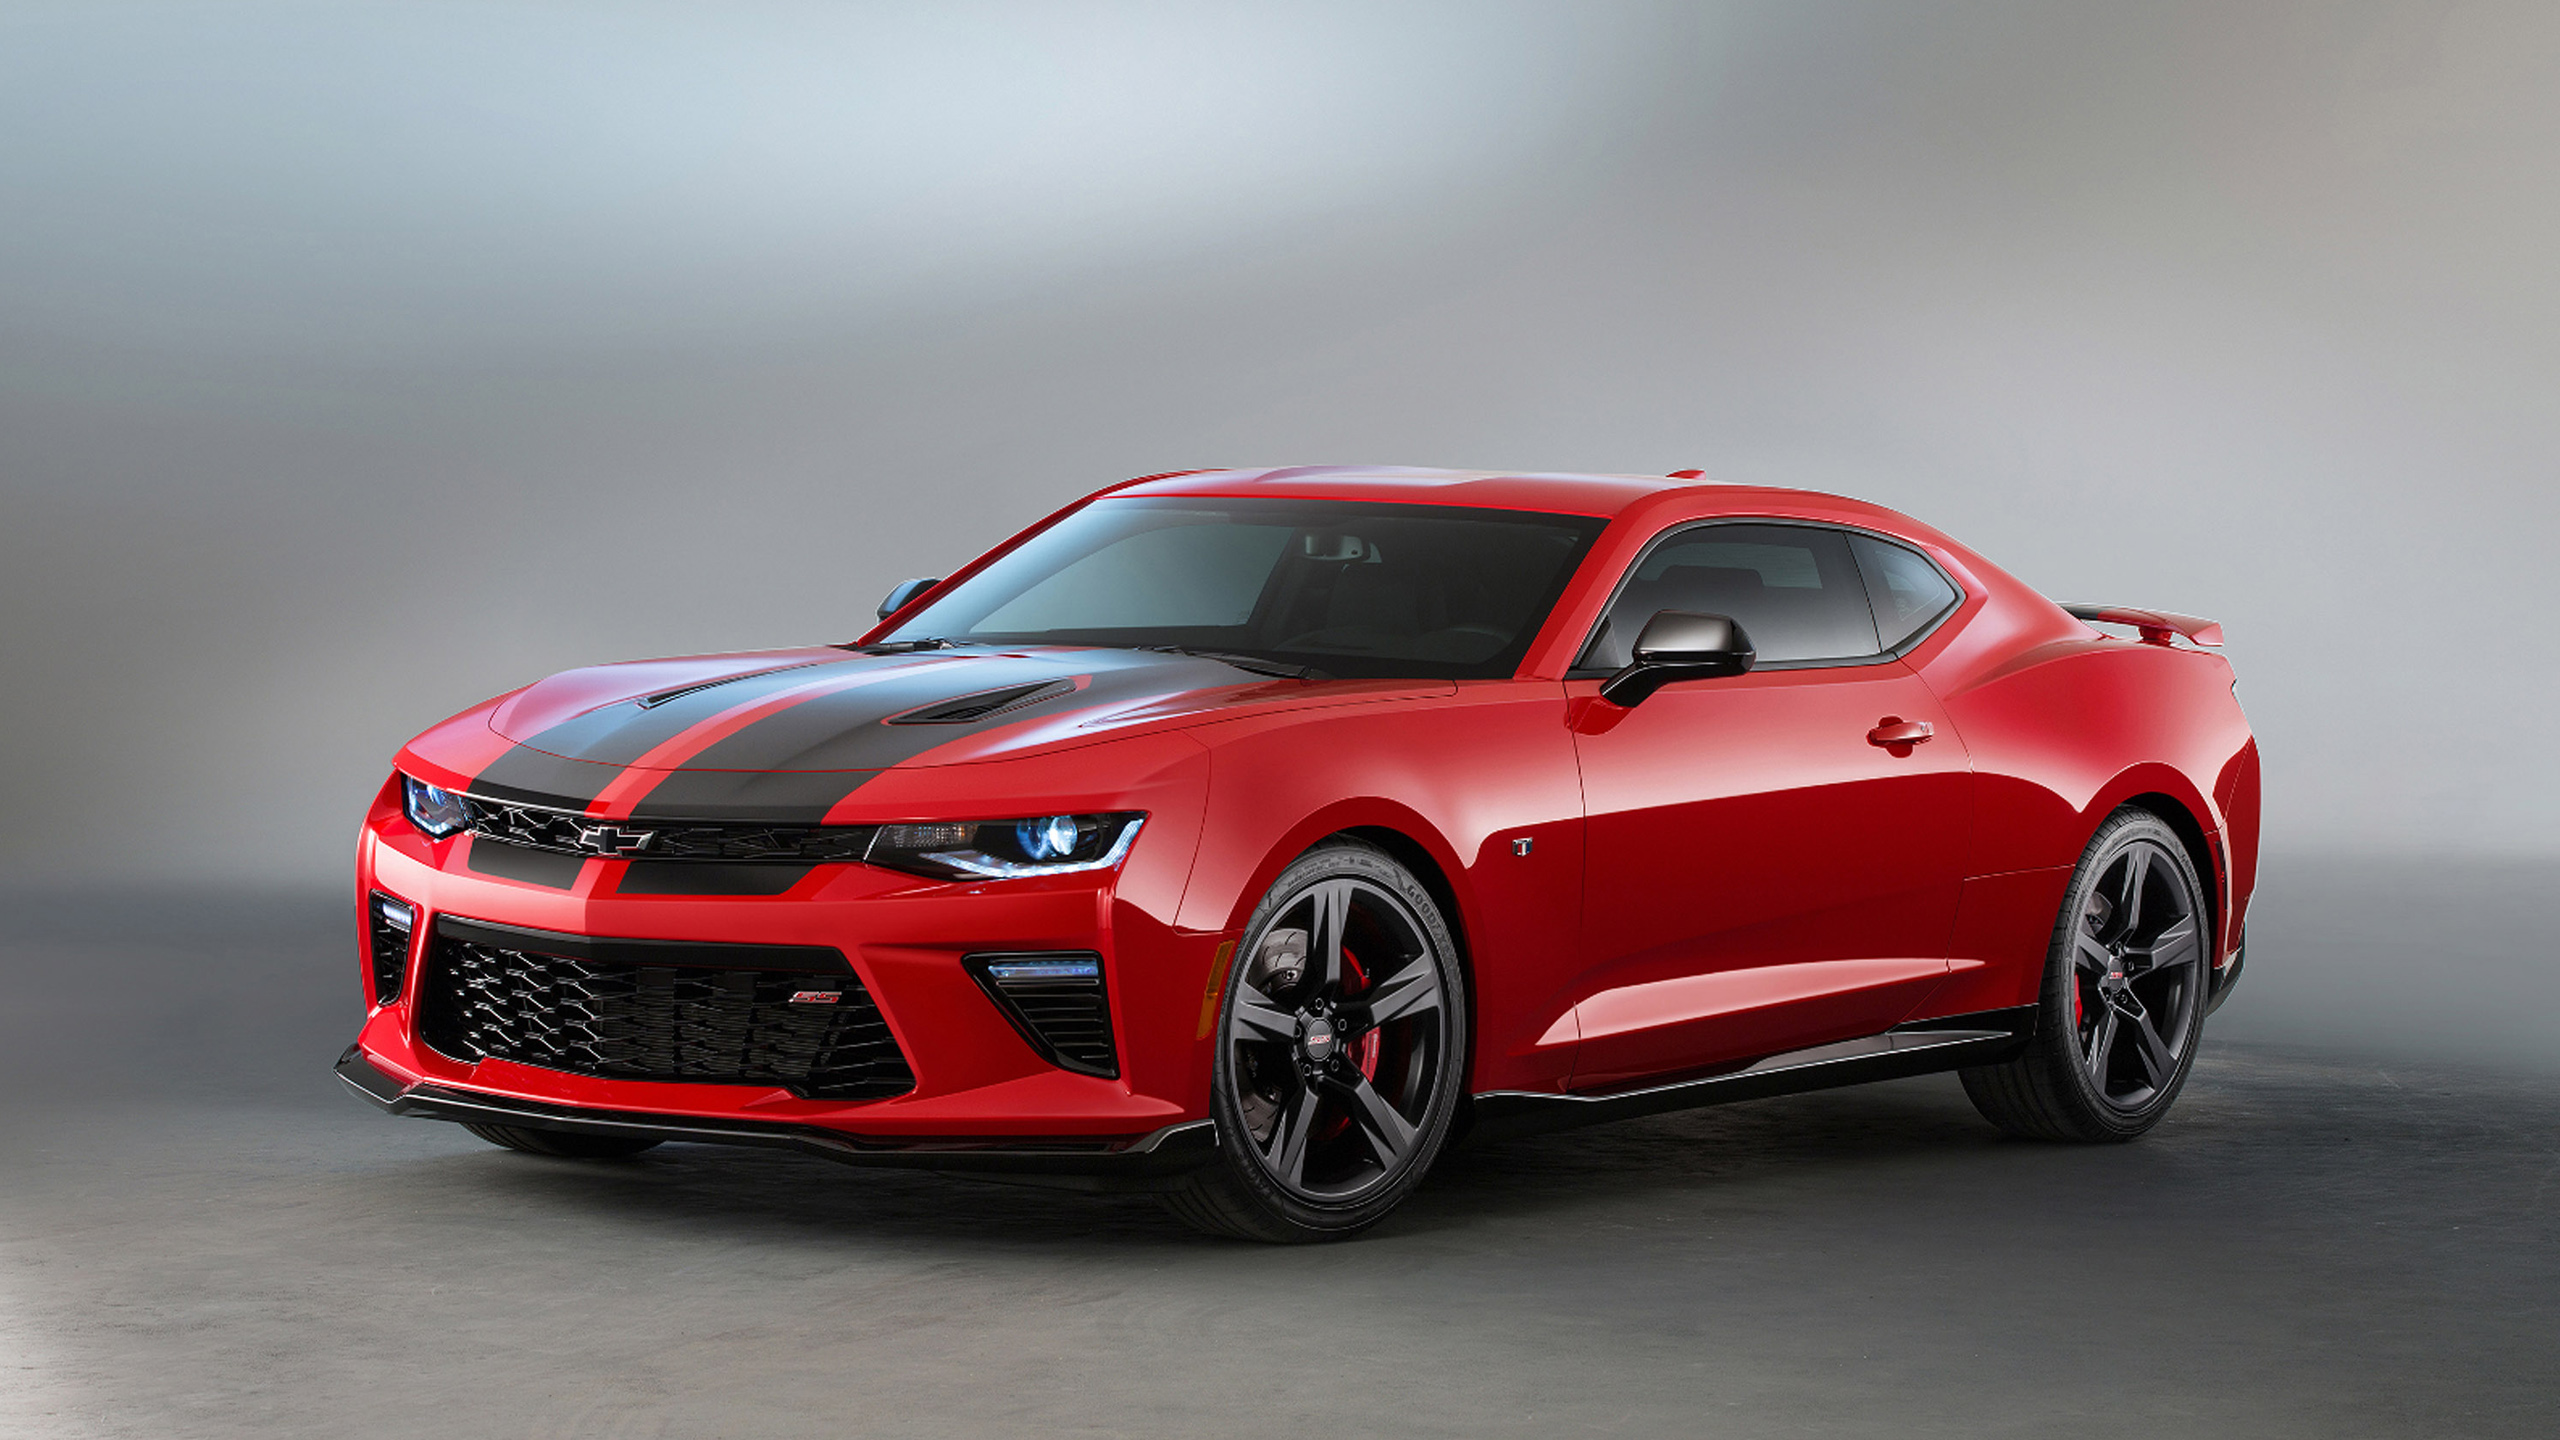 16 Chevrolet Camaro Ss Black Accent Package Wallpaper Hd Car Wallpapers Id 5929